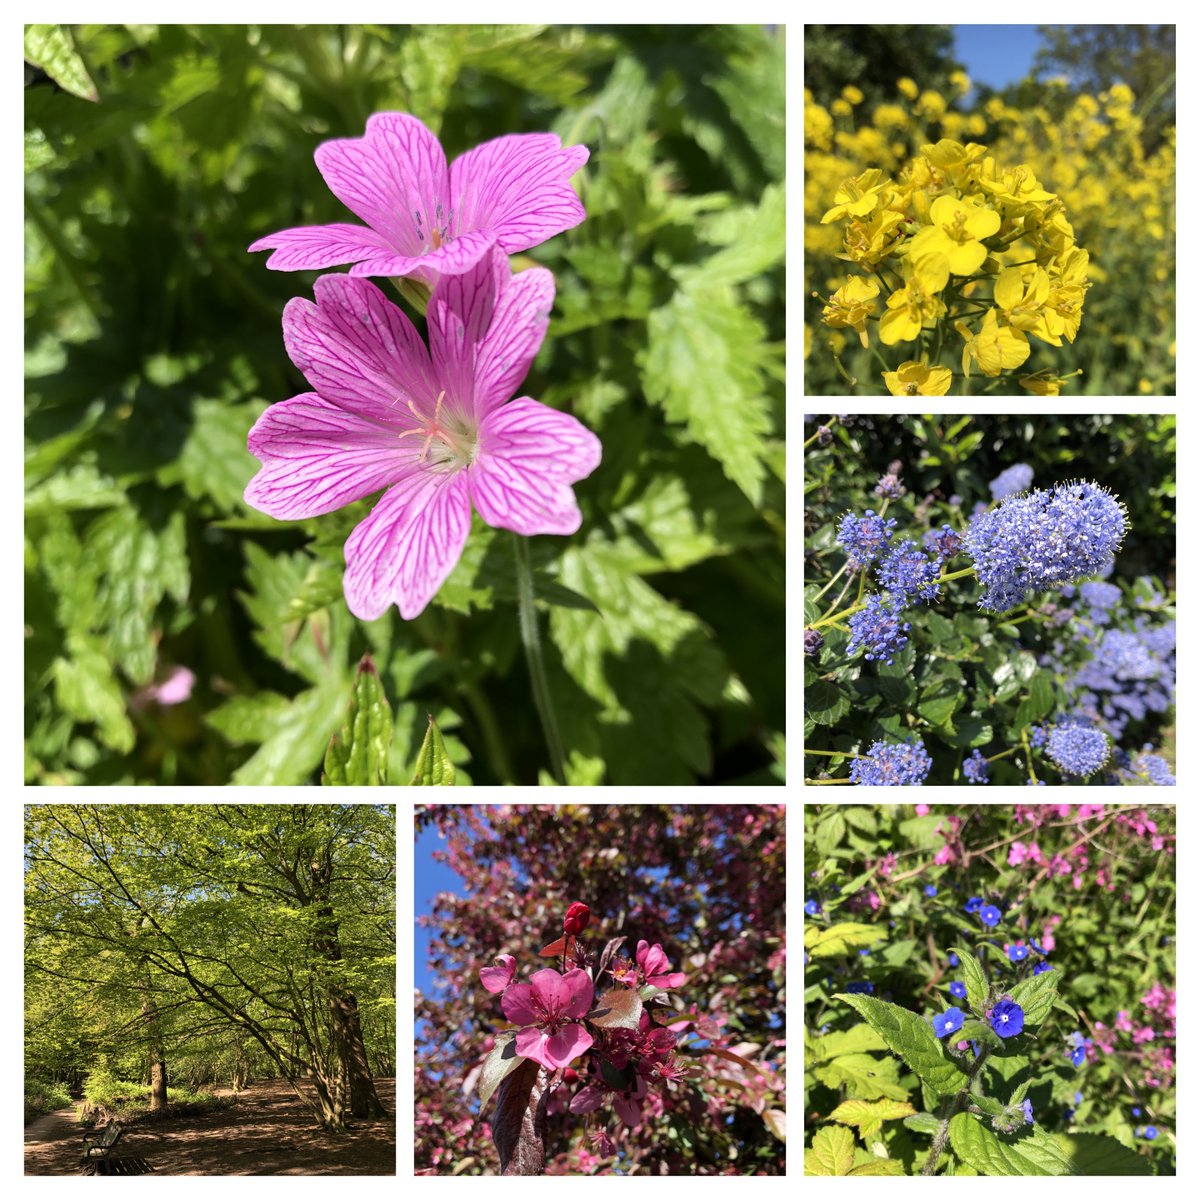 A few photos from this morning's woodland walk.